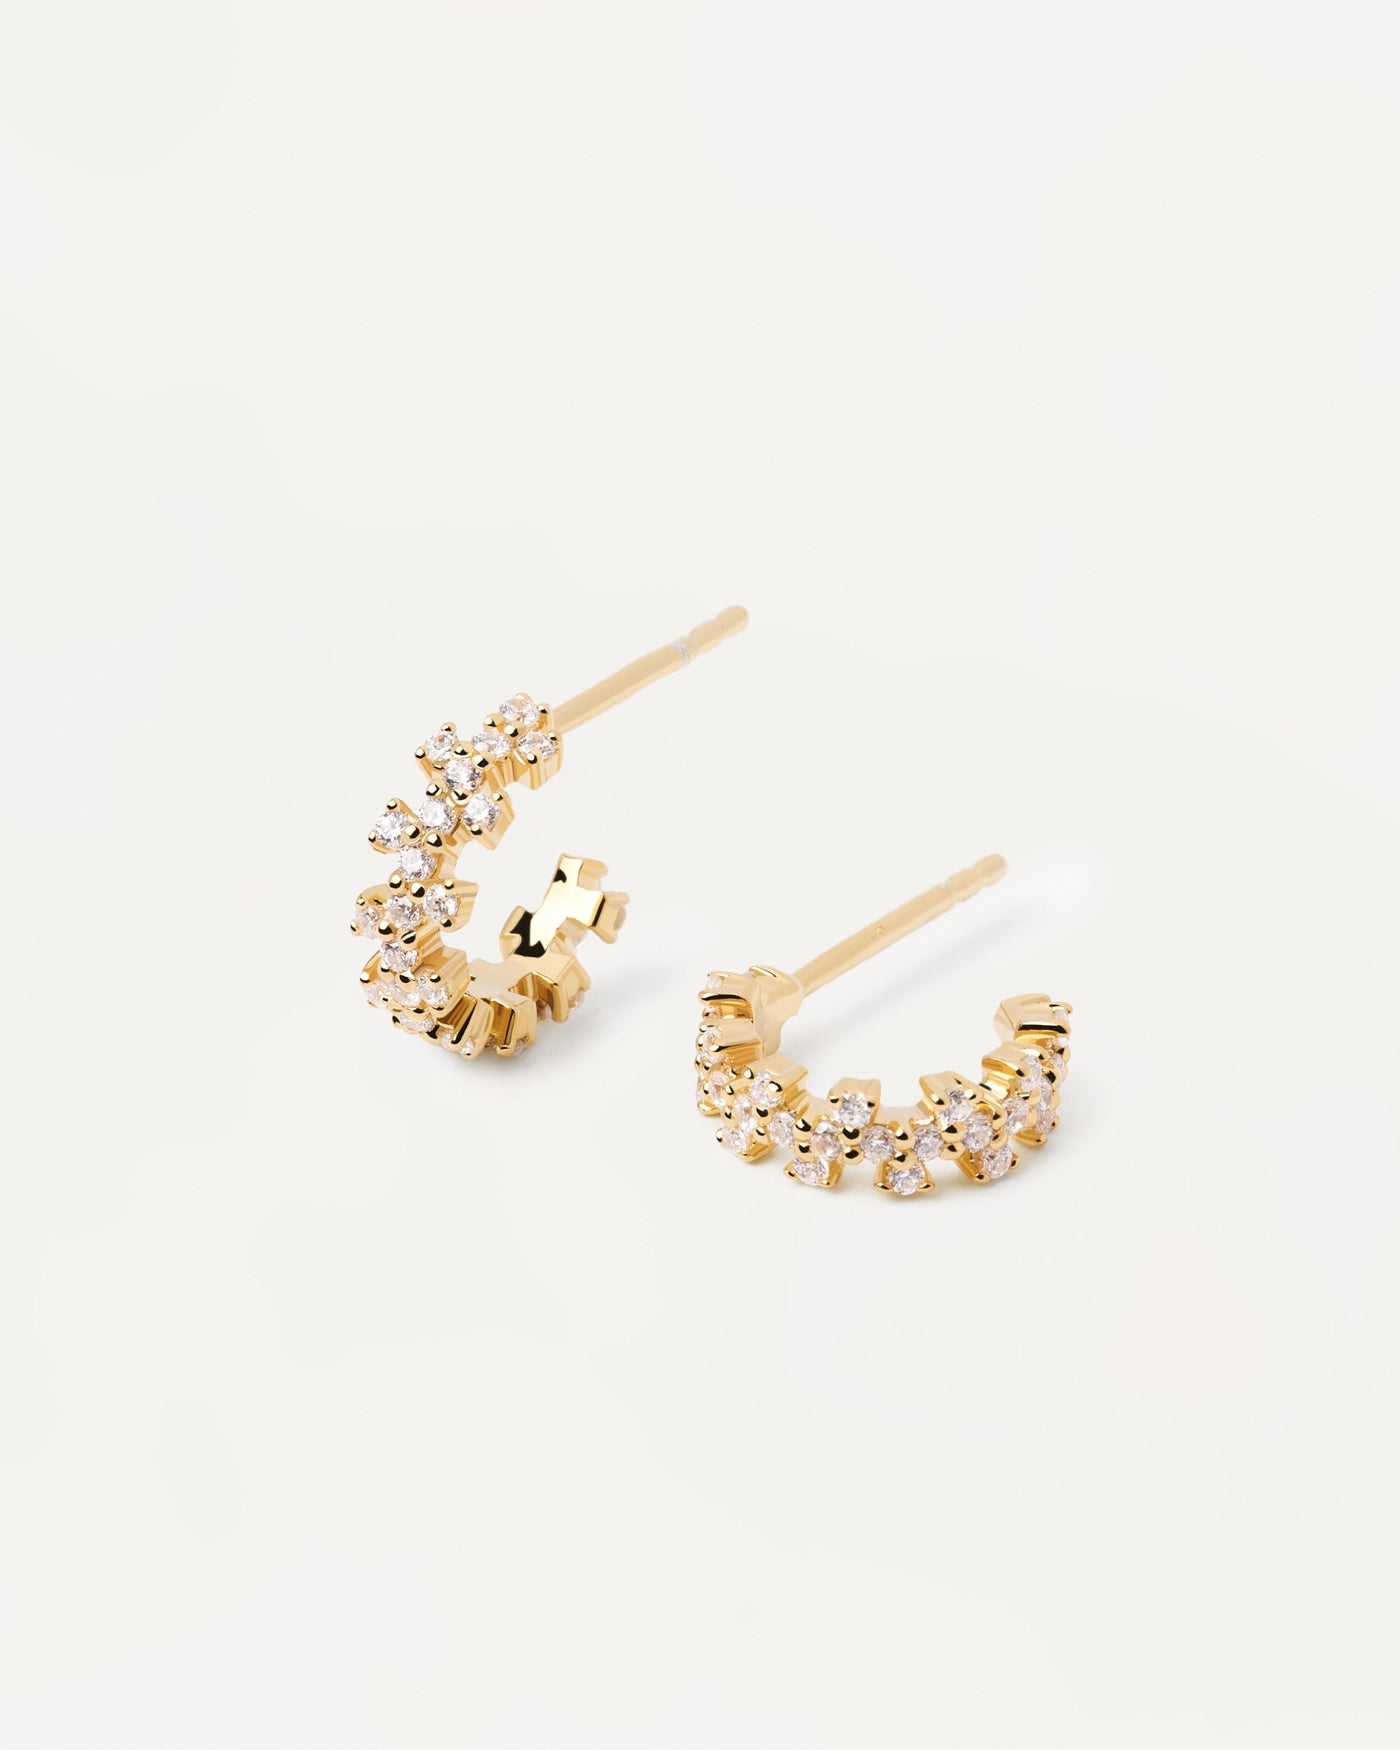 2023 Selection | Little Crown Earrings. Gold-plated small hoops with white zirconia. Get the latest arrival from PDPAOLA. Place your order safely and get this Best Seller. Free Shipping.